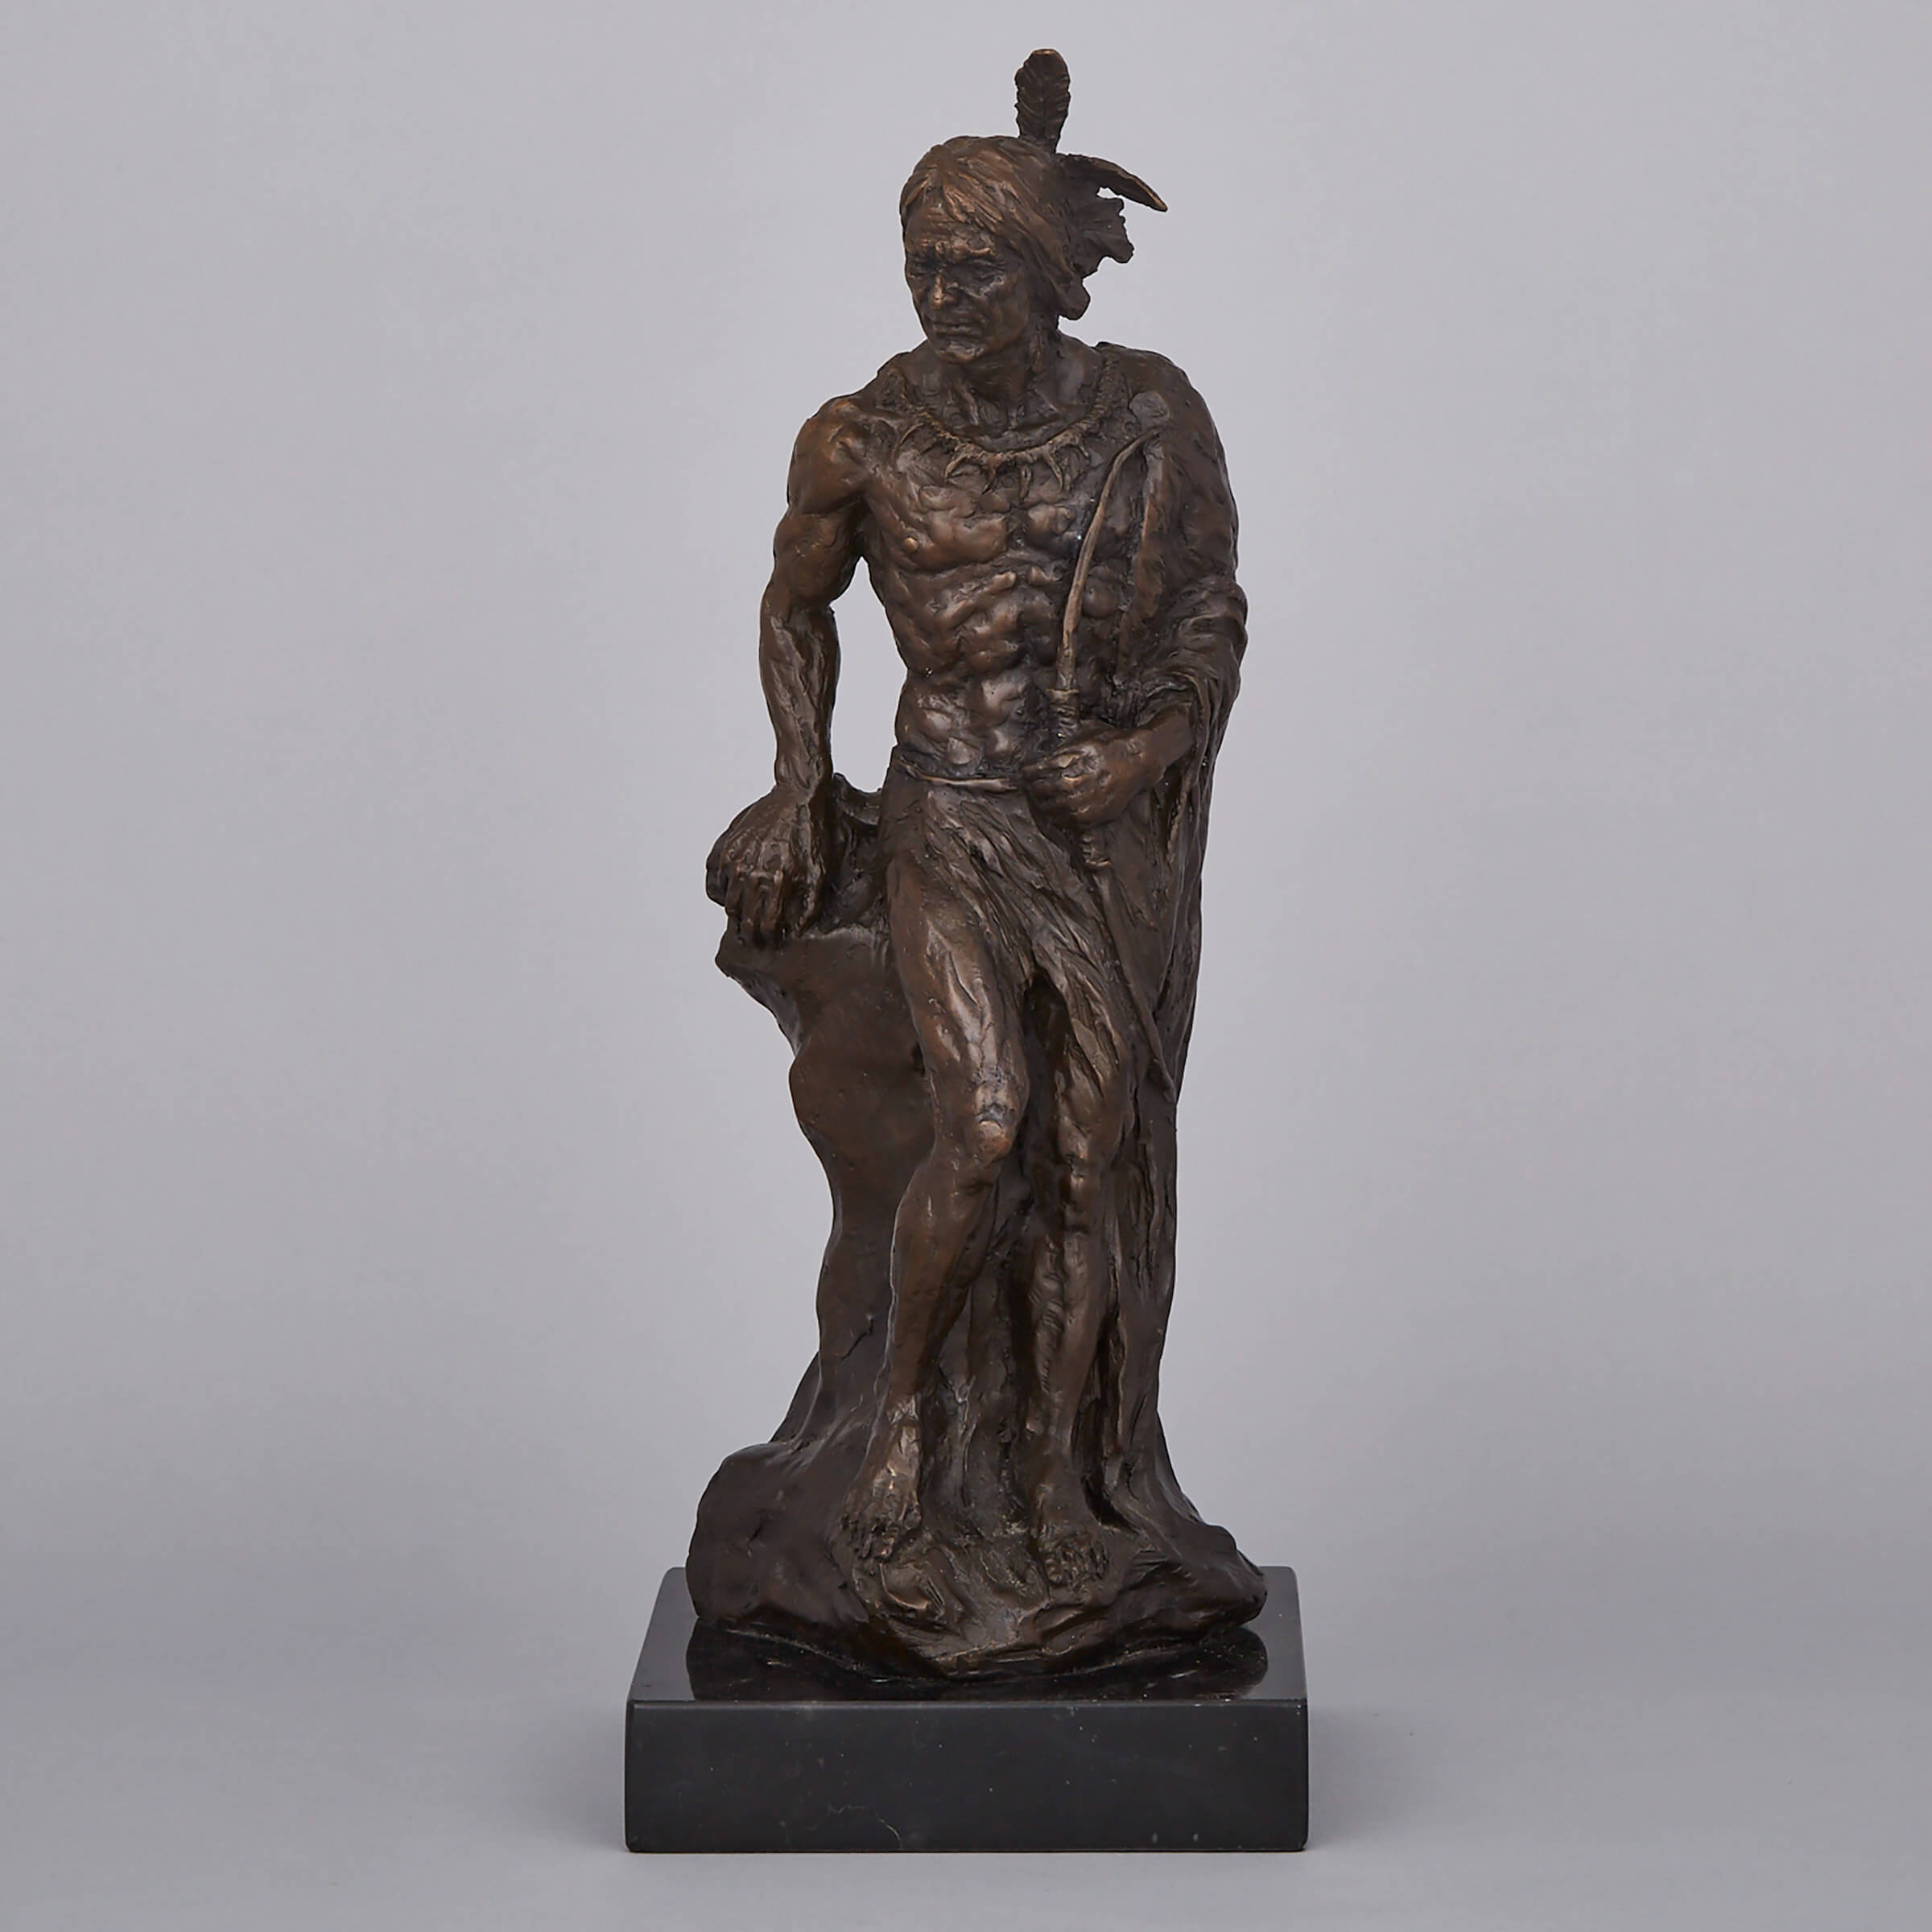 Patinated Bronze FIgure of a Native American Indian, 20th century